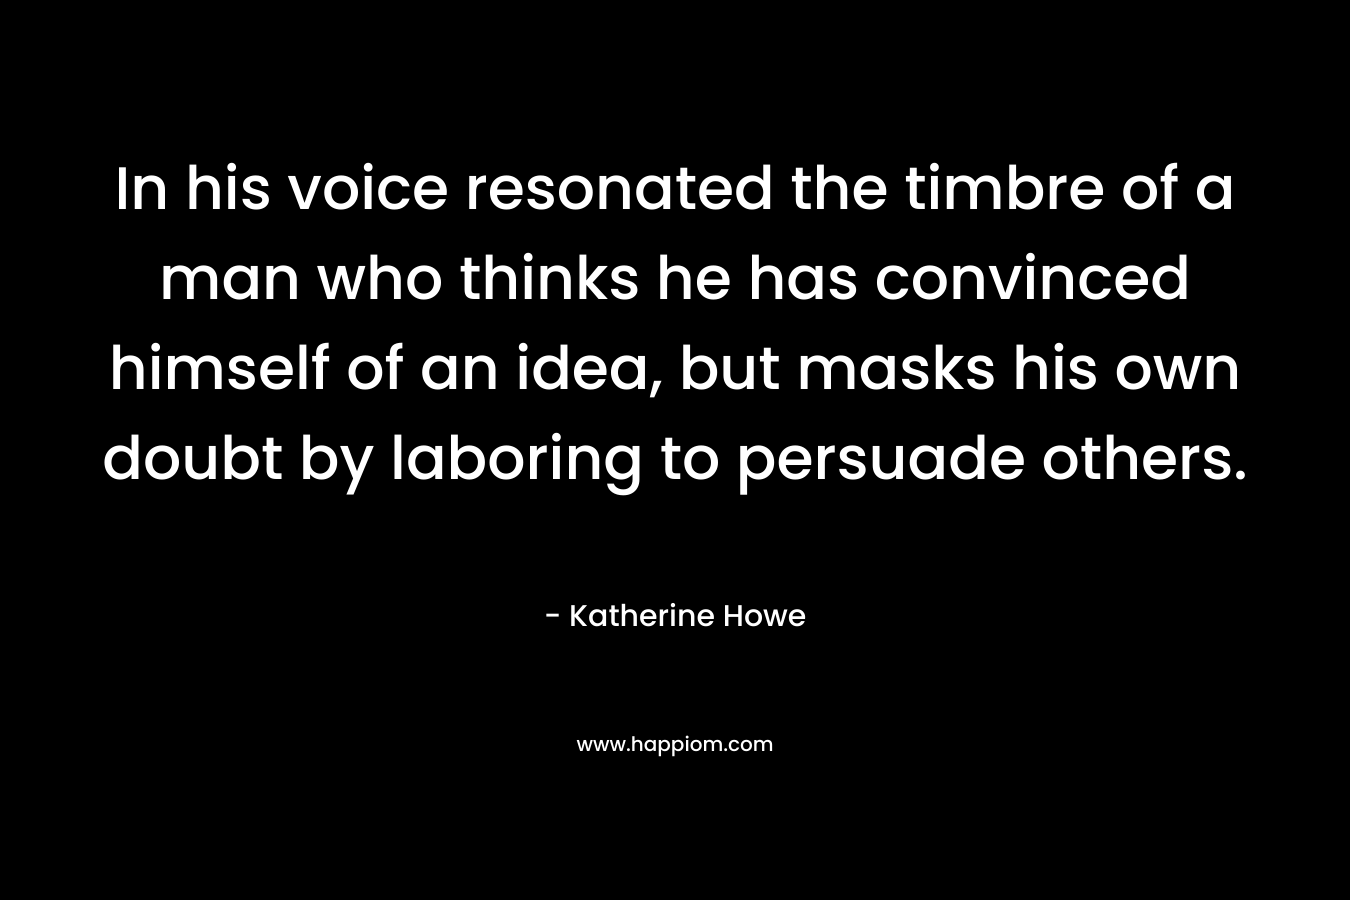 In his voice resonated the timbre of a man who thinks he has convinced himself of an idea, but masks his own doubt by laboring to persuade others. – Katherine Howe